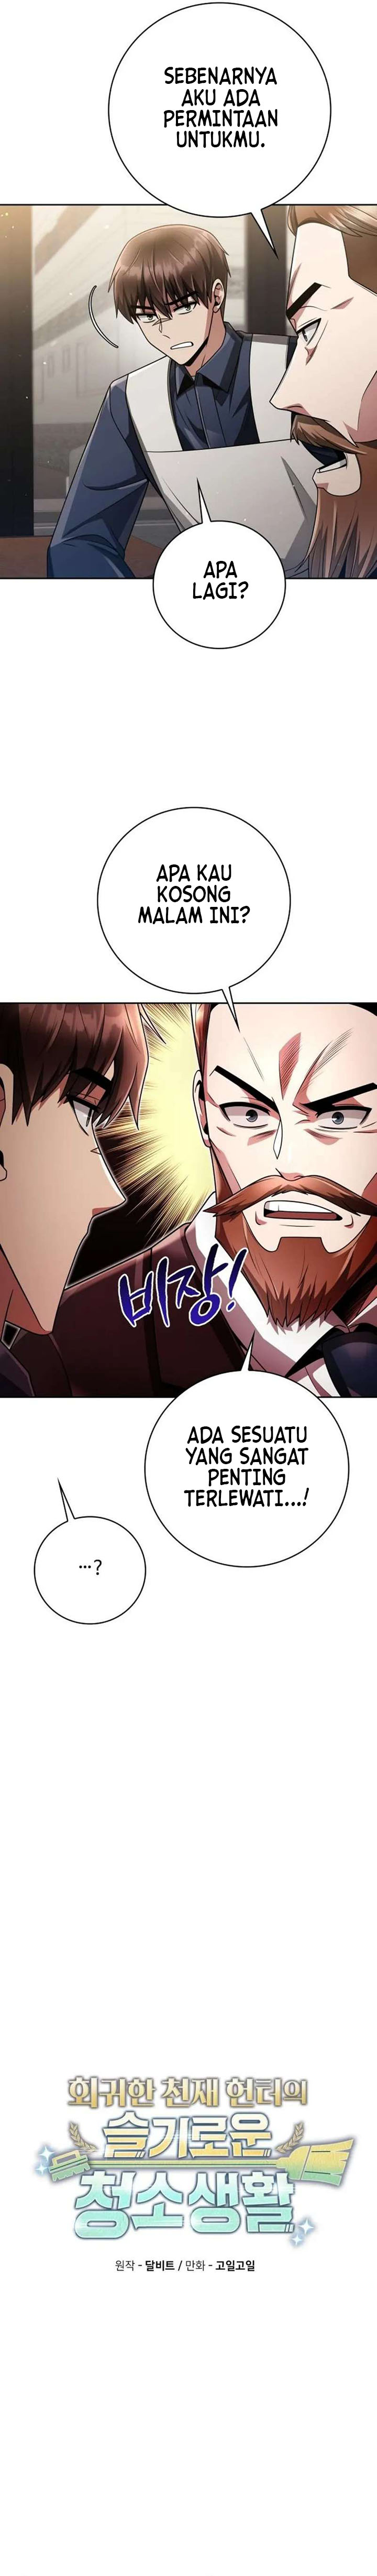 Dilarang COPAS - situs resmi www.mangacanblog.com - Komik clever cleaning life of the returned genius hunter 044 - chapter 44 45 Indonesia clever cleaning life of the returned genius hunter 044 - chapter 44 Terbaru 5|Baca Manga Komik Indonesia|Mangacan